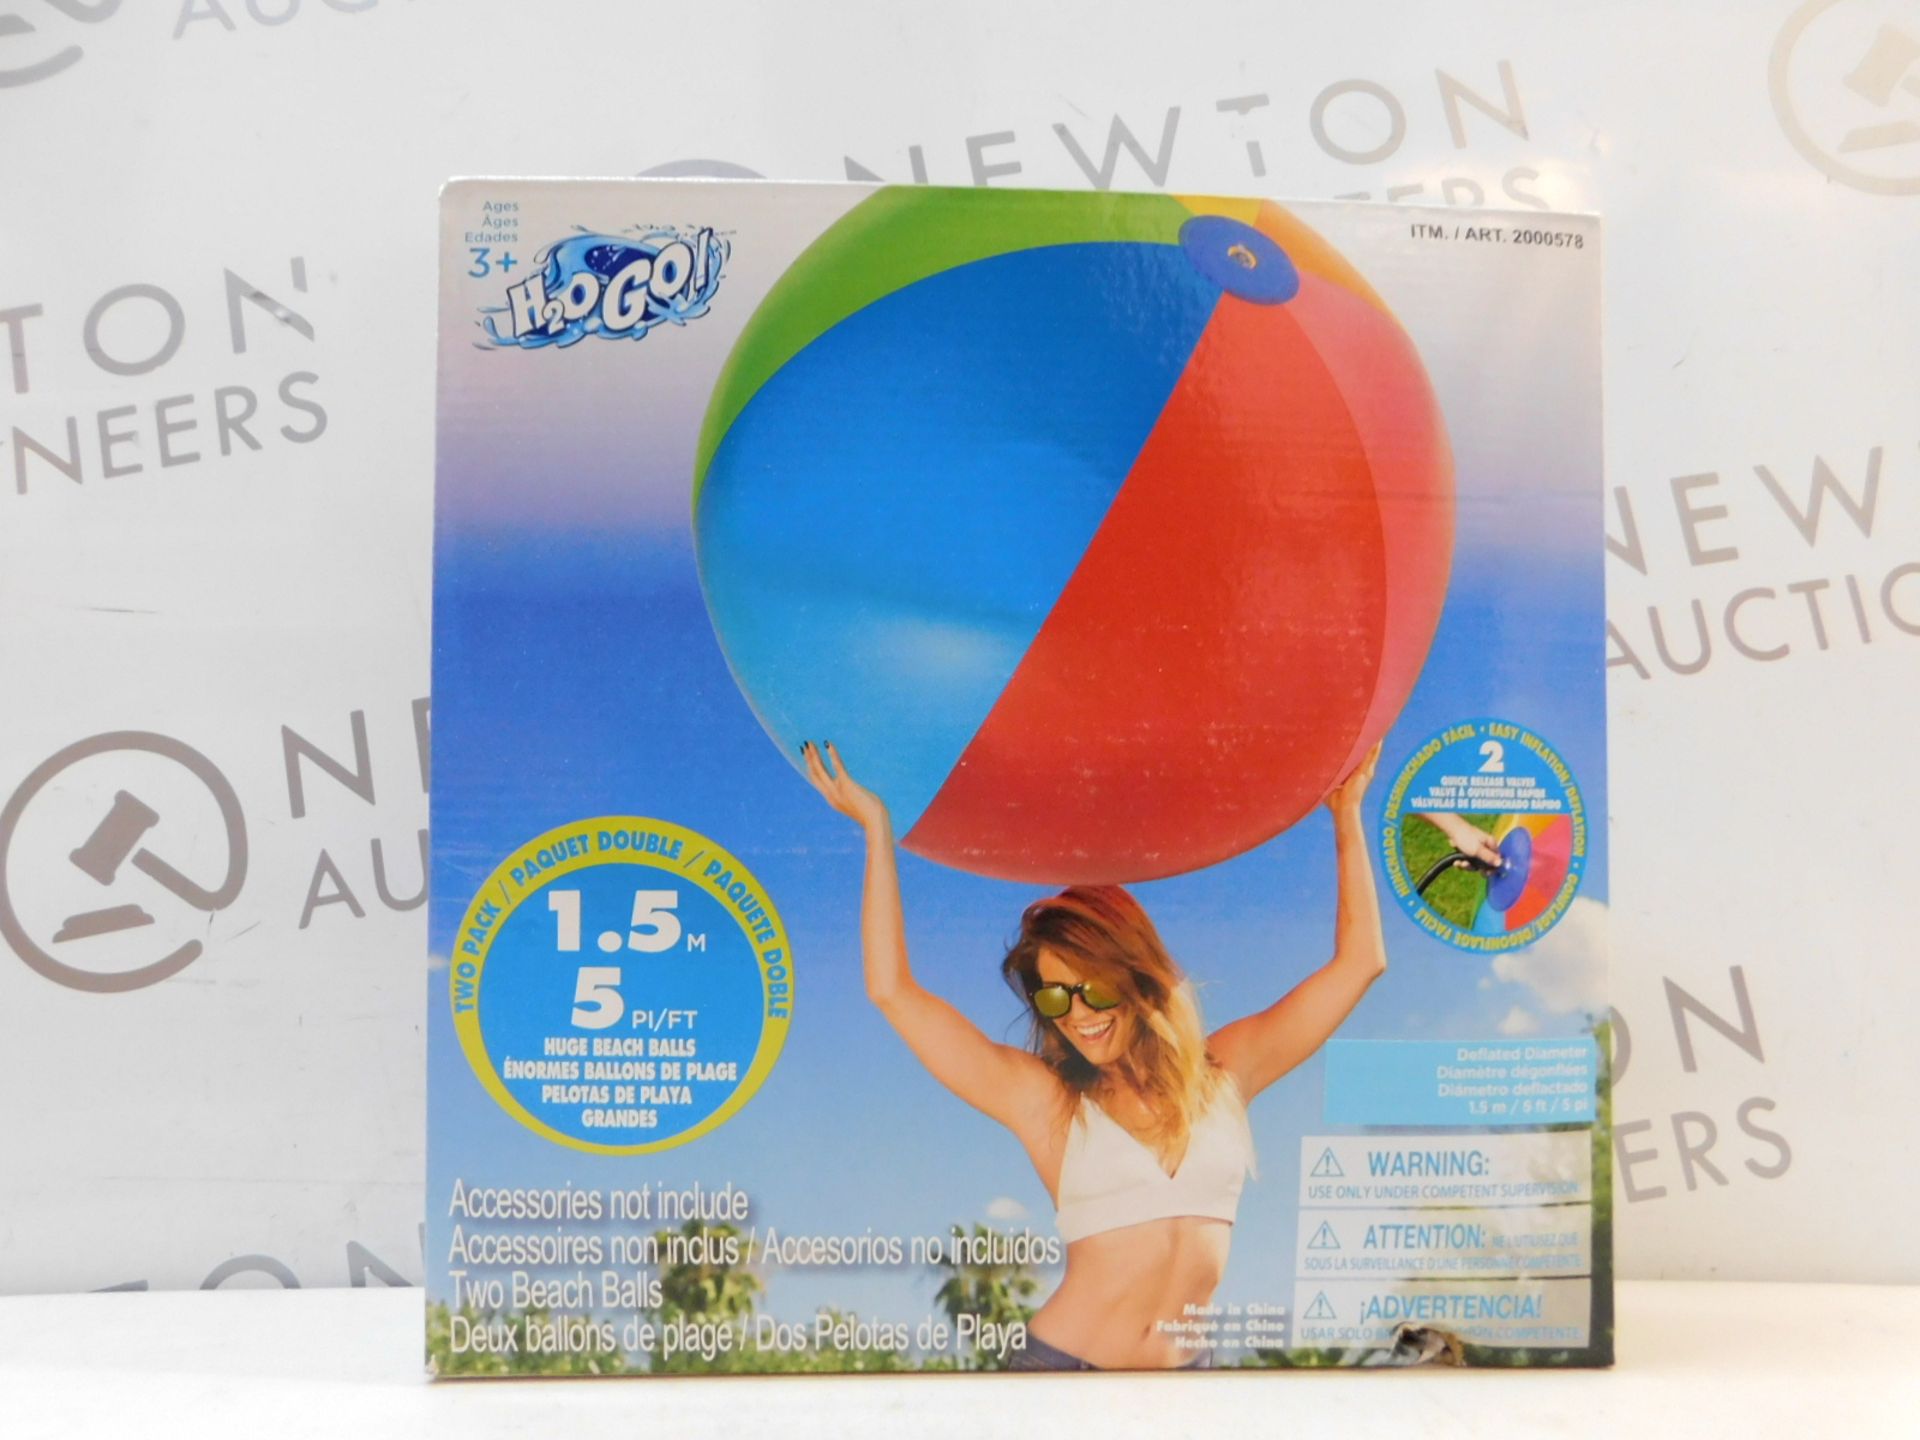 1 BRAND NEW BOXED SET OF 2 BESTWAY 60" H2O GO INFLATABLE BEACH BALLS RRP £19.99